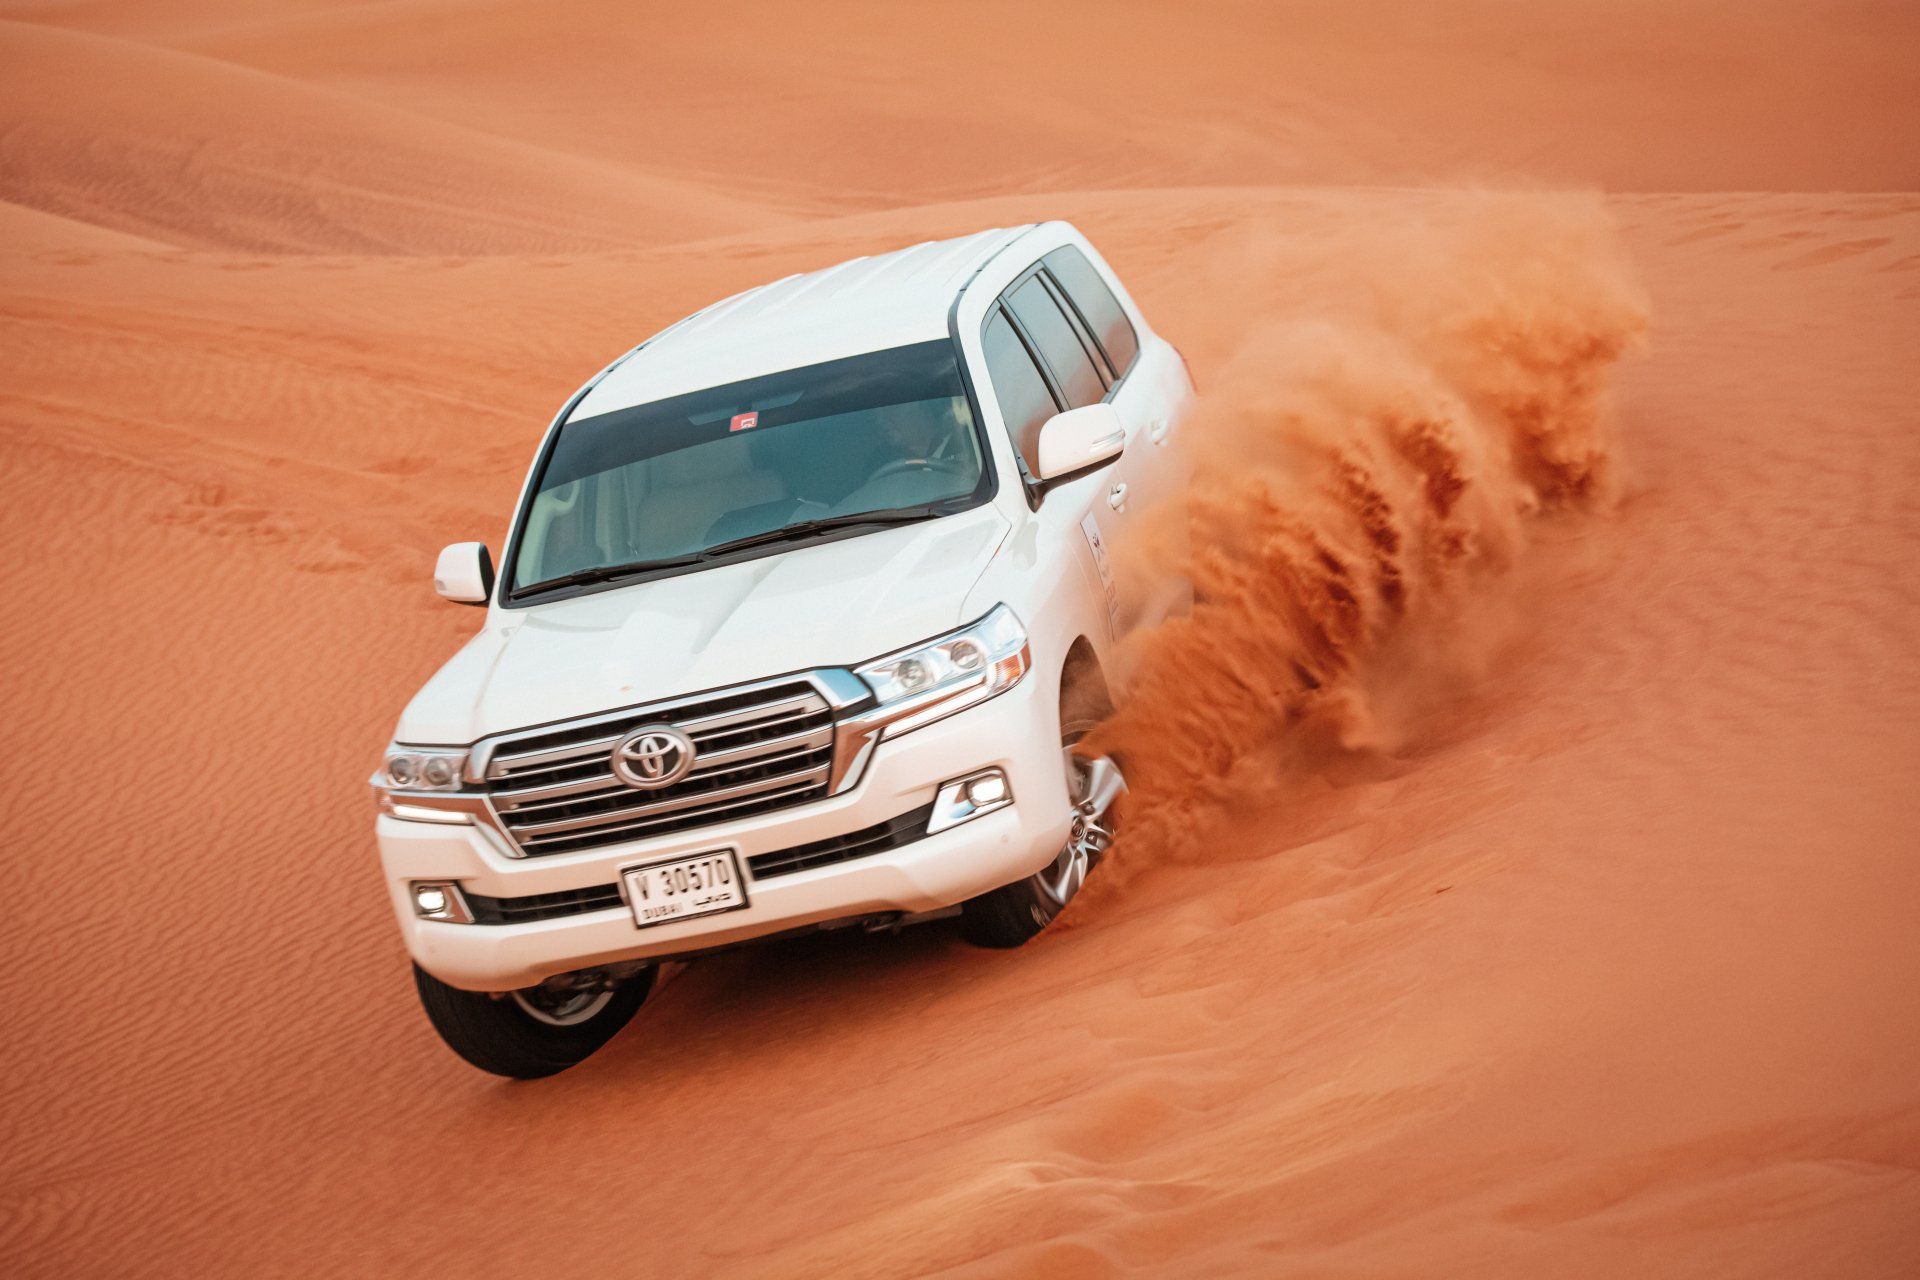 A white suv is driving down a sand dune in the desert.